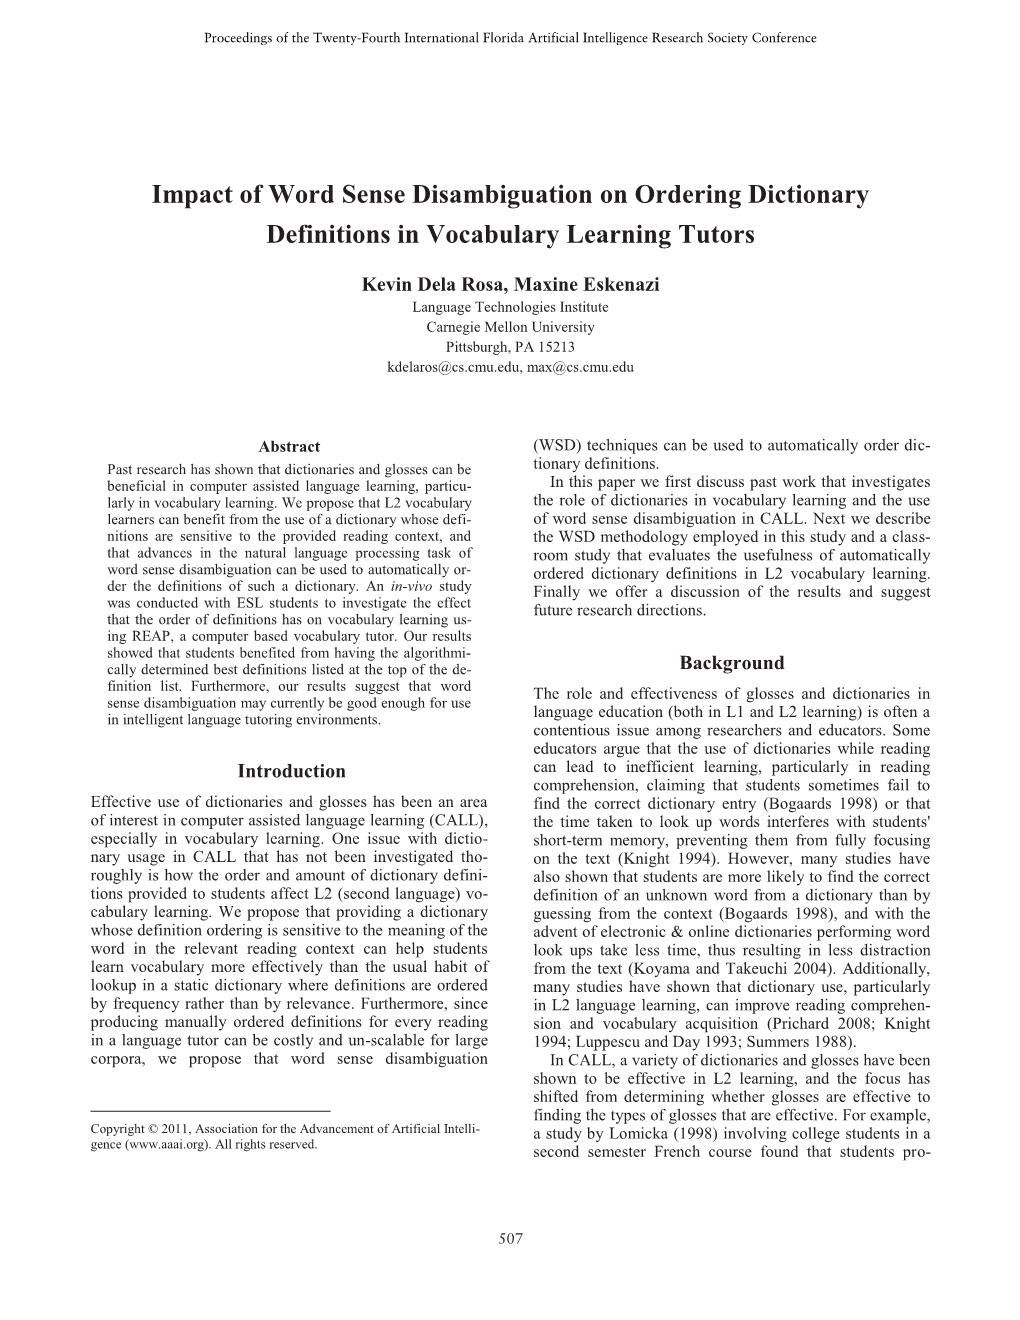 Impact of Word Sense Disambiguation on Ordering Dictionary Definitions in Vocabulary Learning Tutors